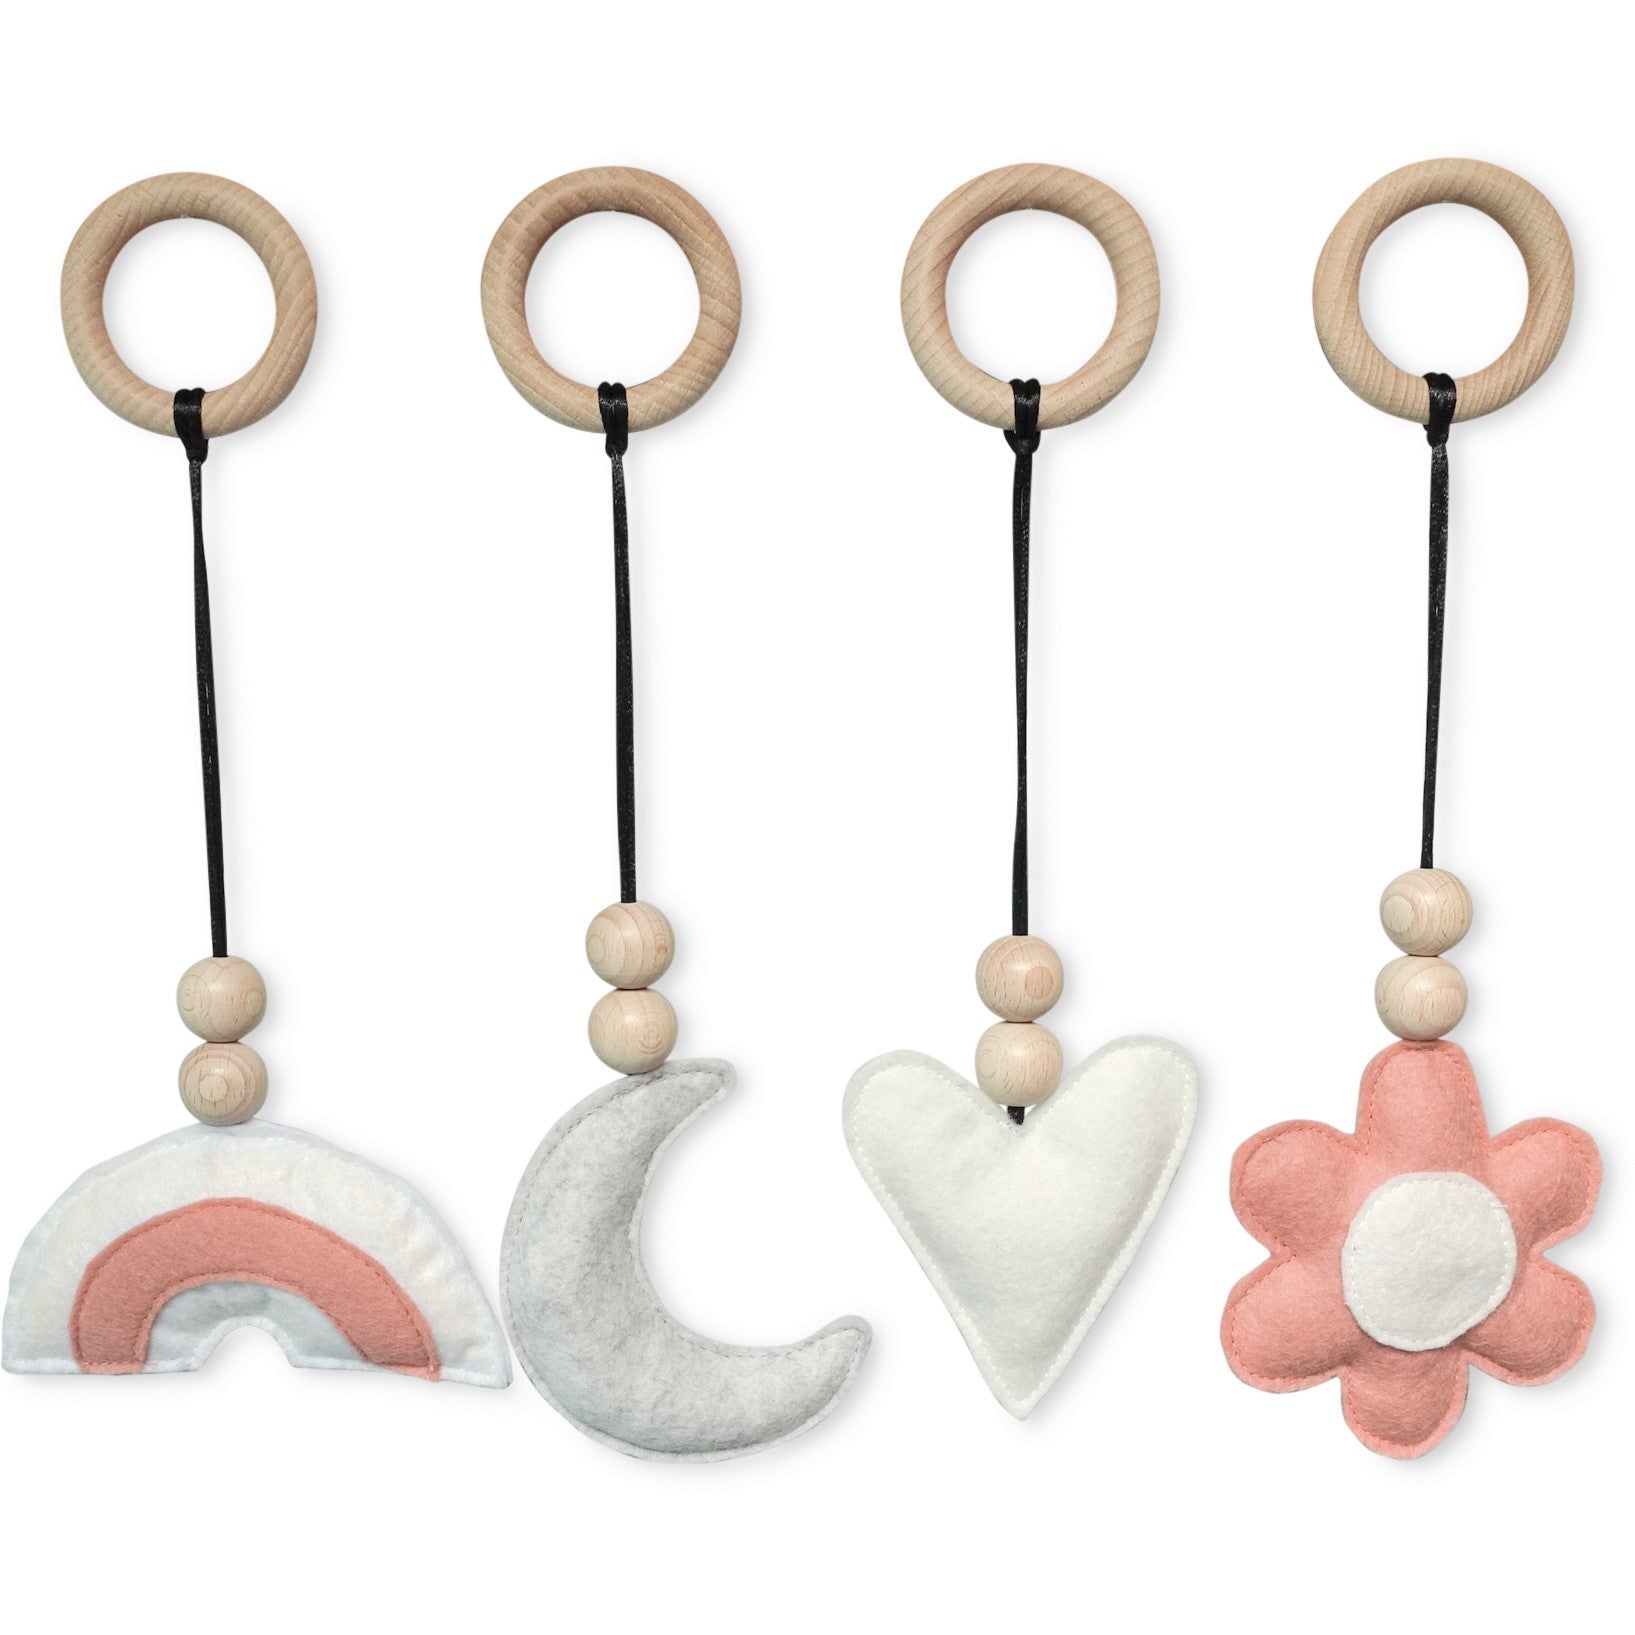 Baby gym hangers with a flower - felt and wooden beads - toddie.com